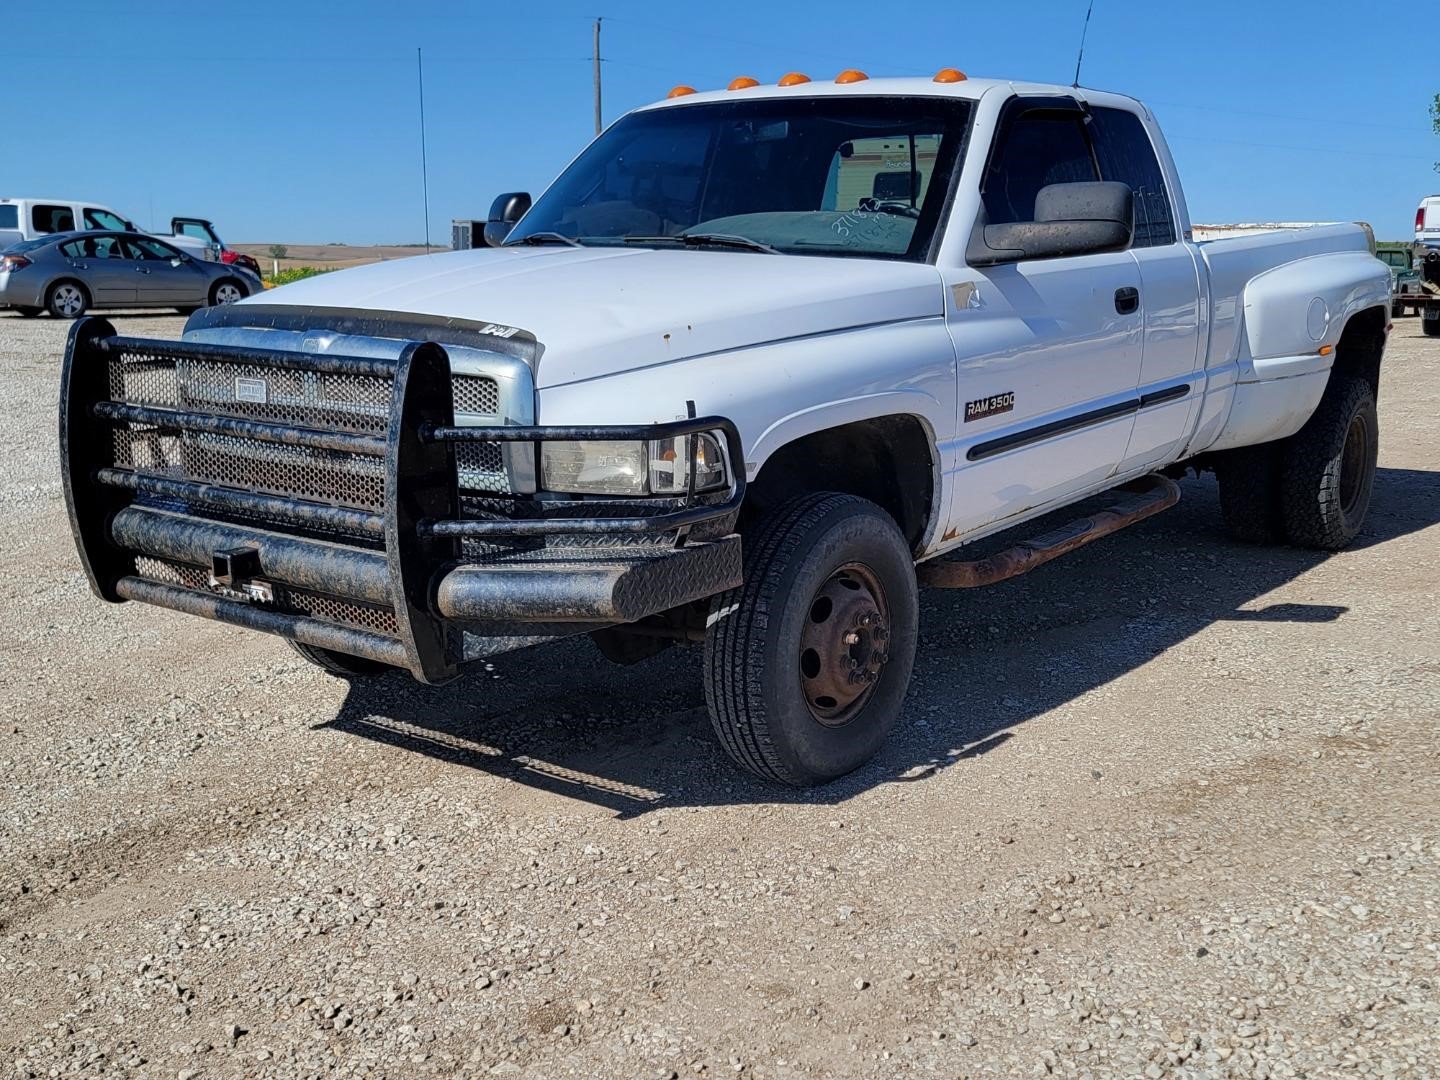 2001 Dodge RAM 3500 4x4 Extended Cab Dually Pickup BigIron Auctions